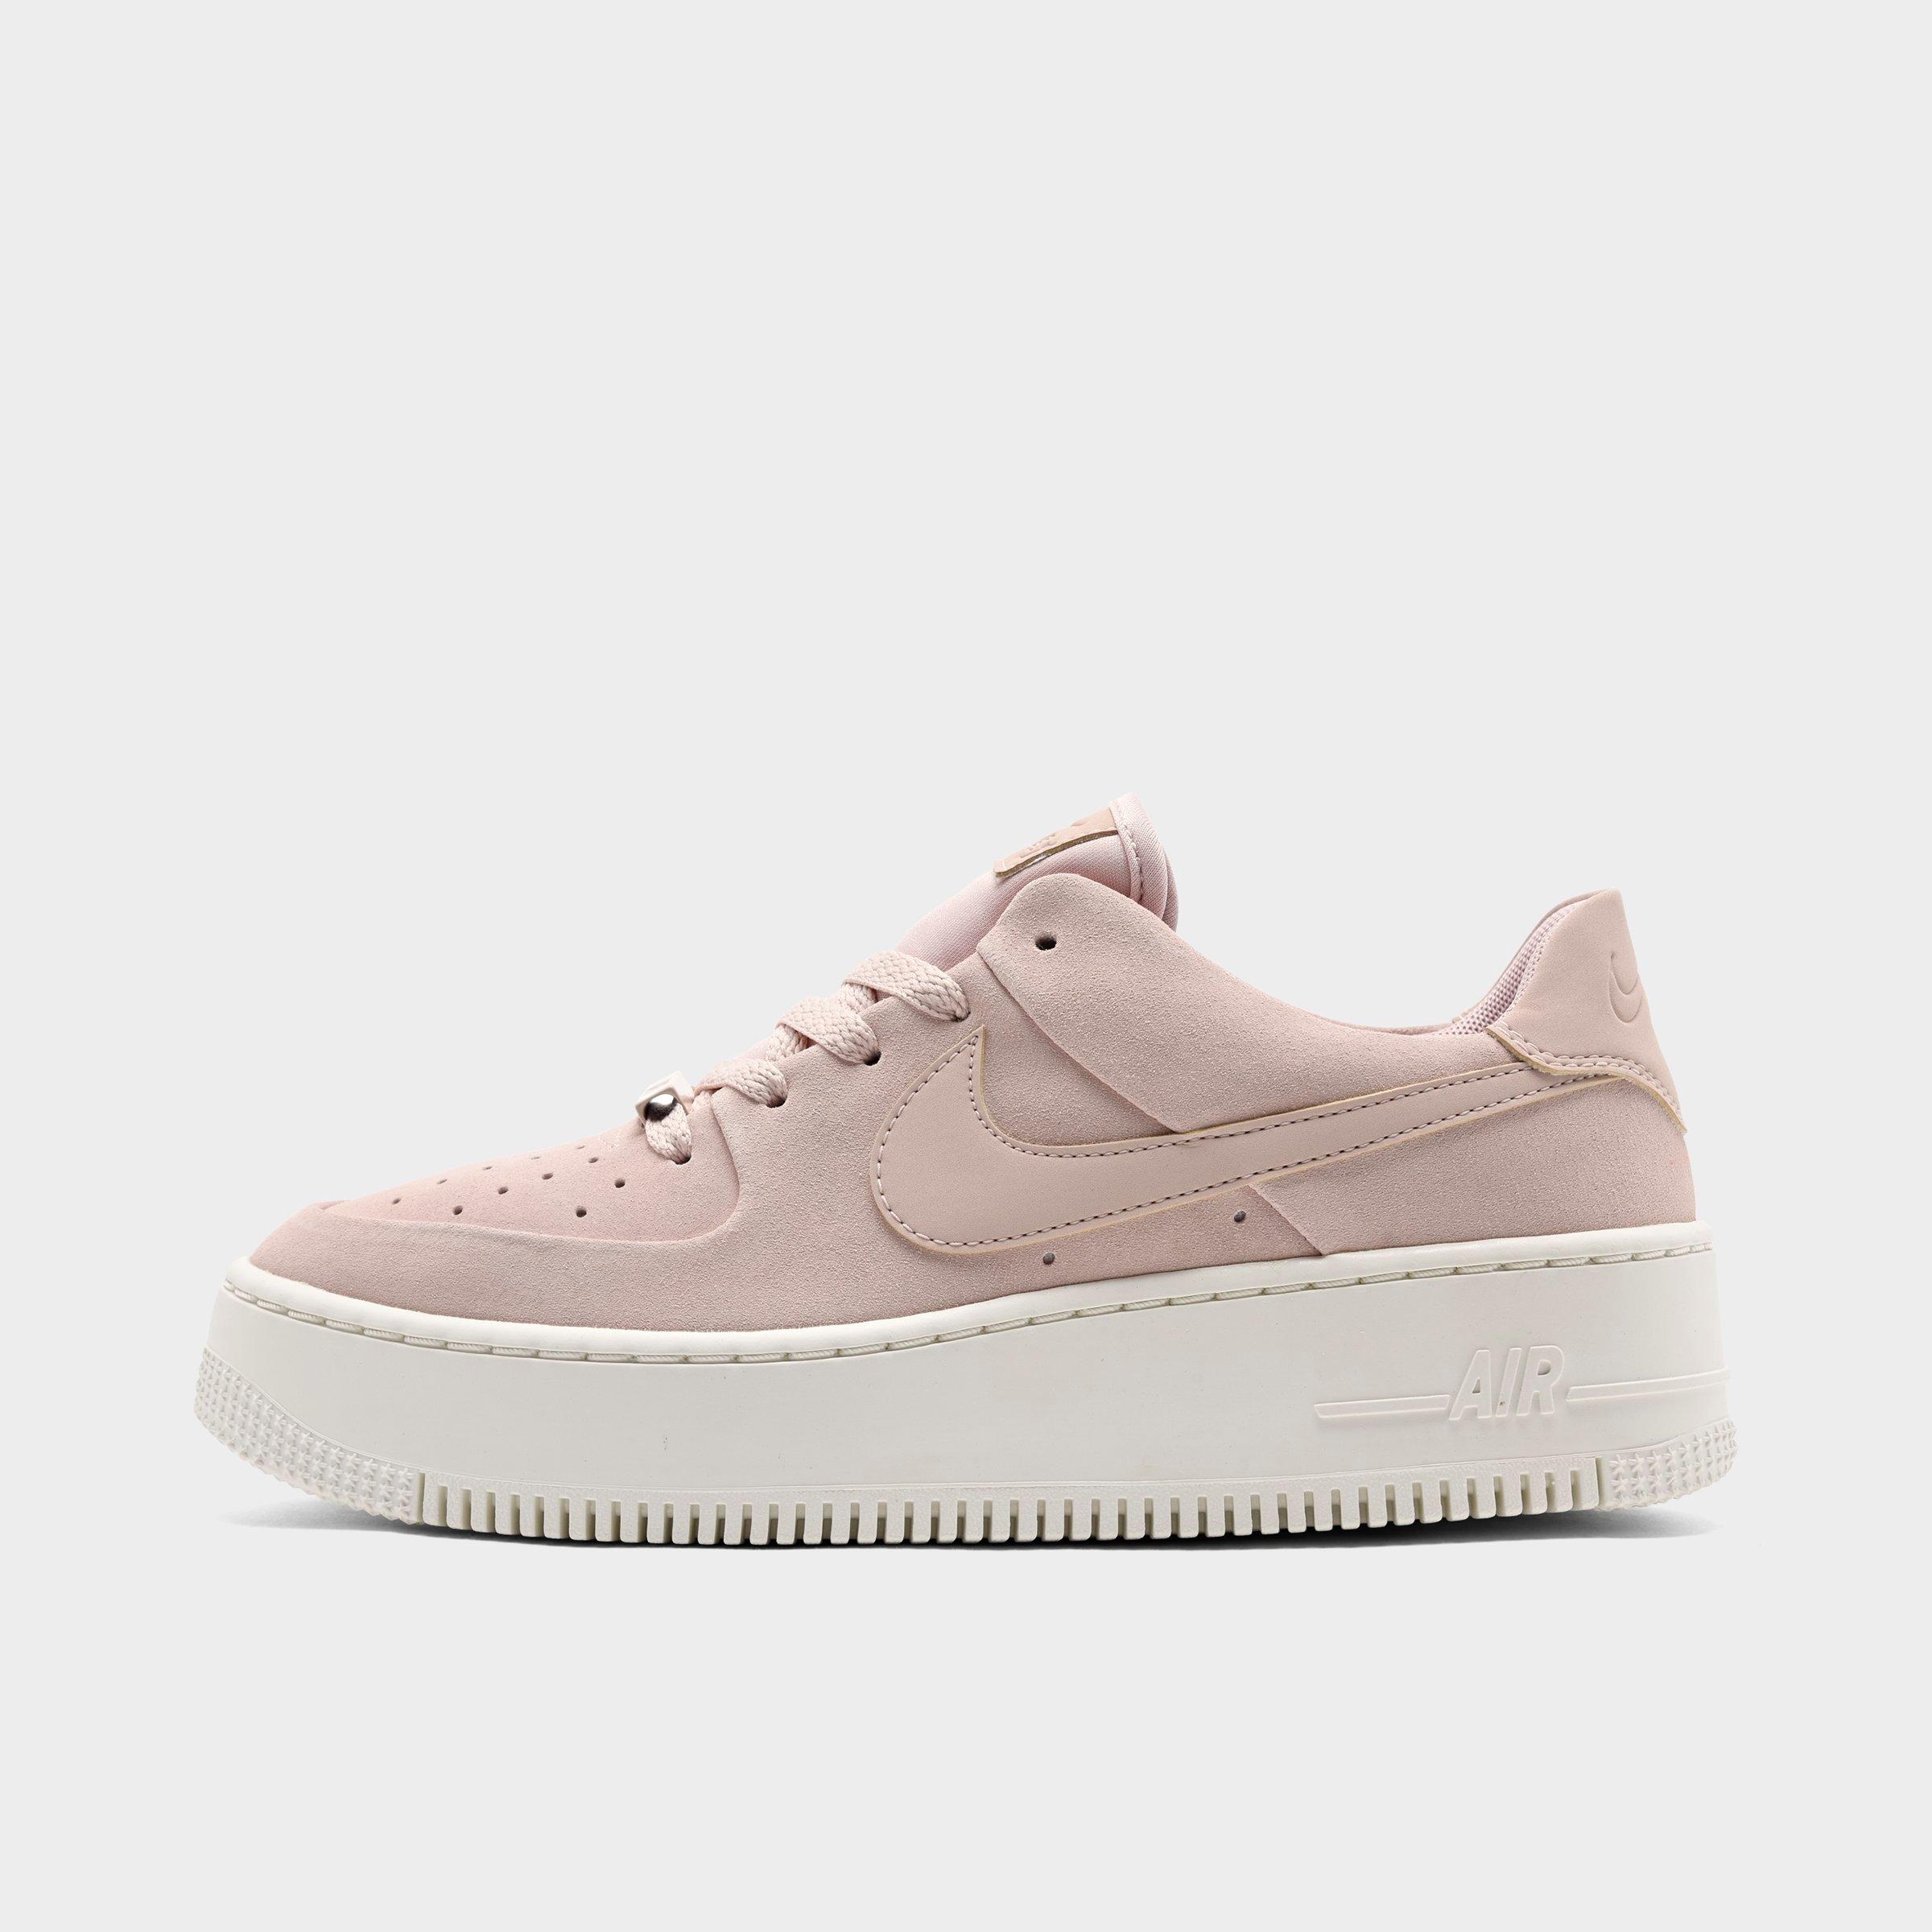 nike air force 1 sage low canada